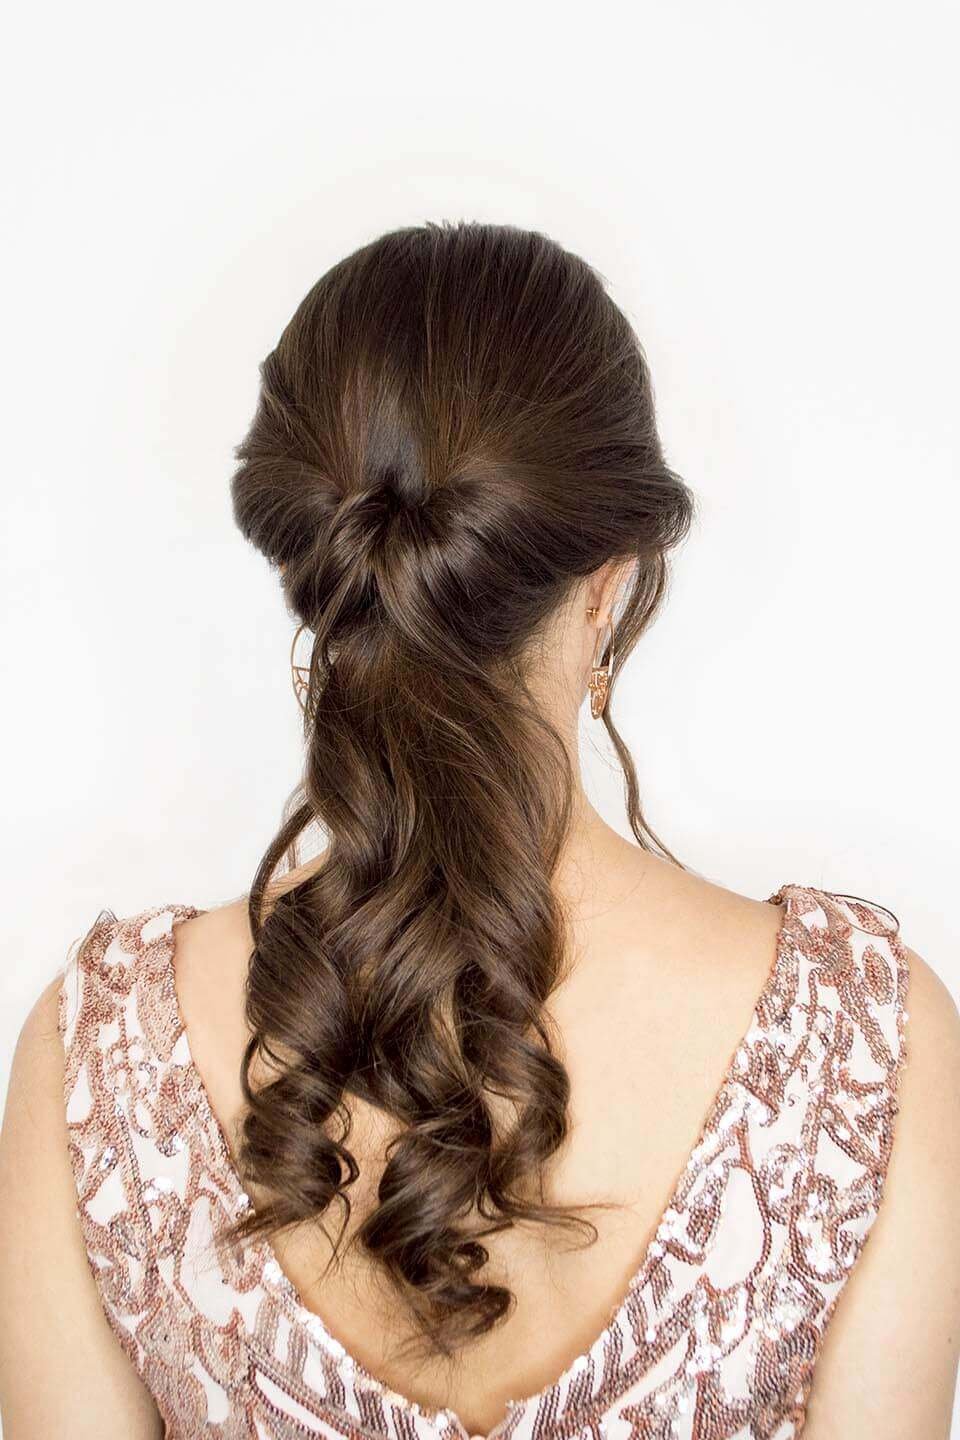 Easy hairstyle ideas